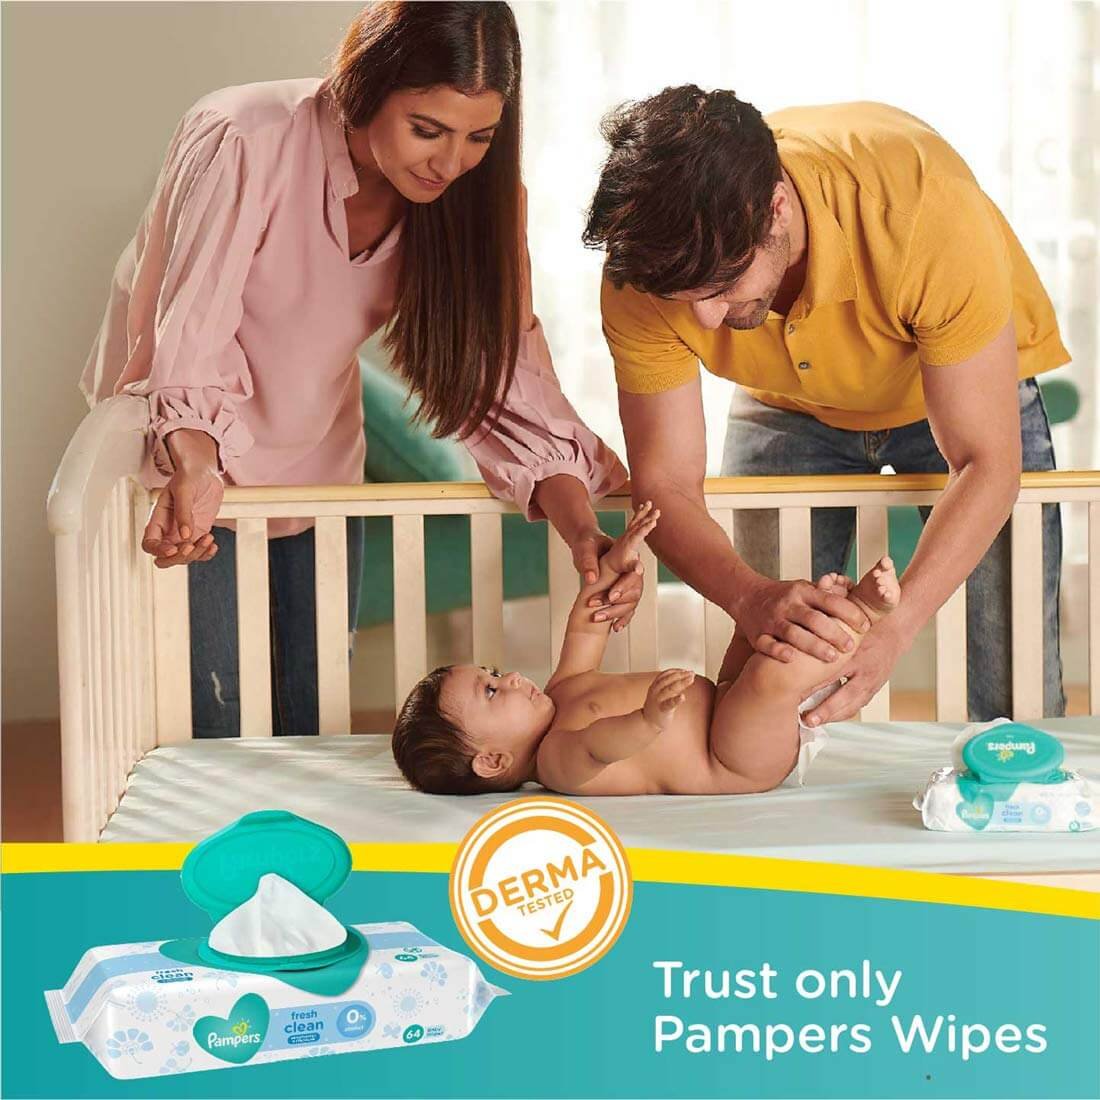 https://shoppingyatra.com/product_images/Pampers All round Protection Pants, Small size baby diapers (SM) 86 Count, Lotion with Aloe Vera4.jpg